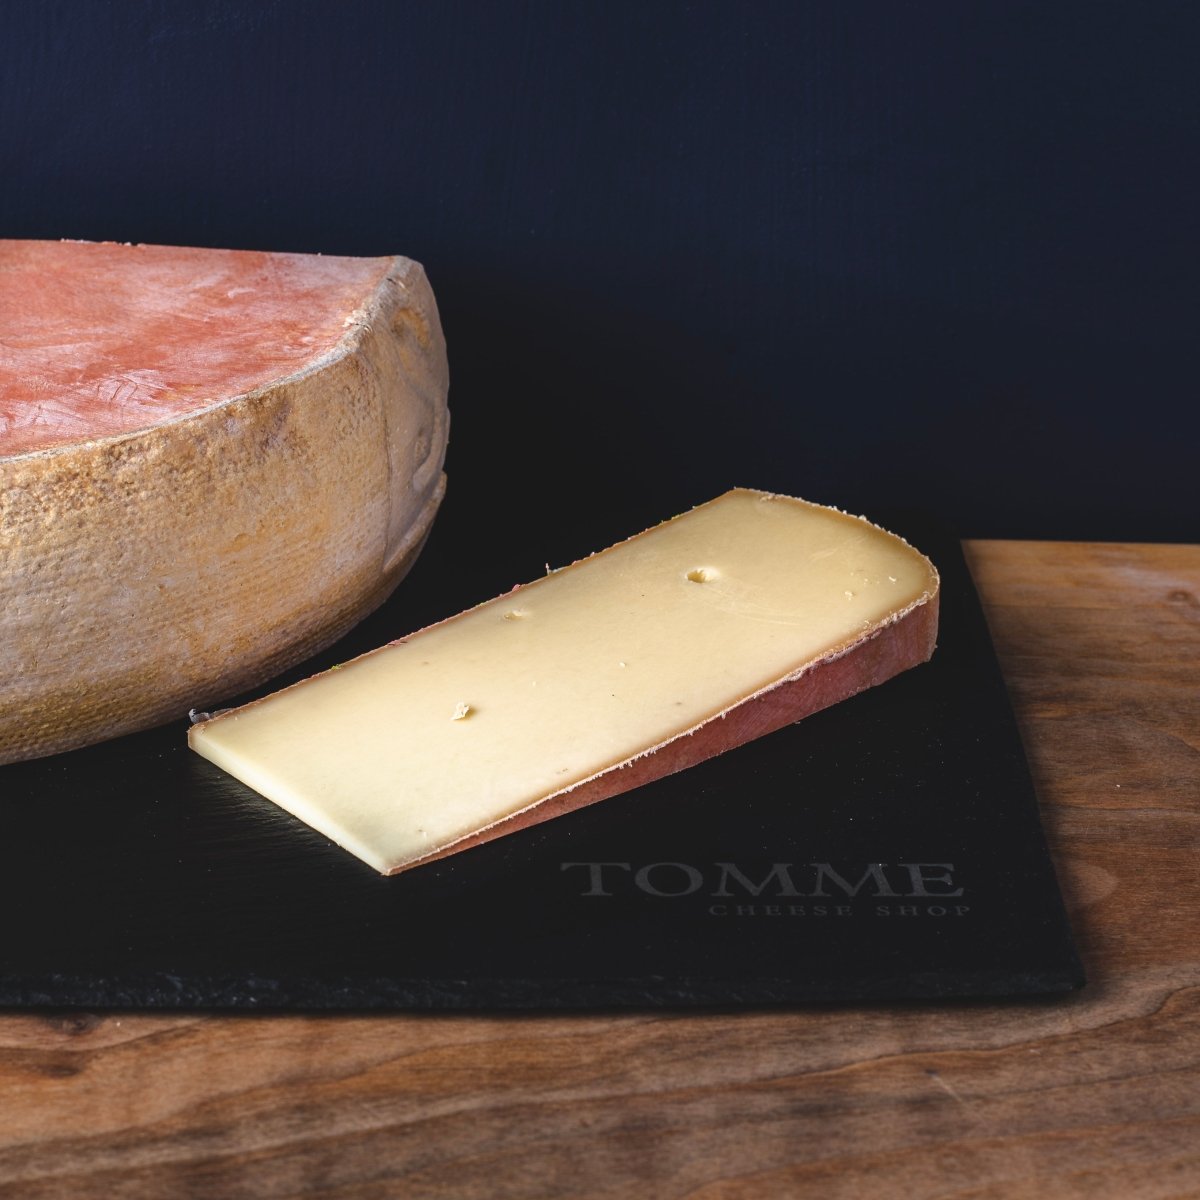 St Niklaus Raclette Tomme Cheese Shop Reviews On Judgeme 